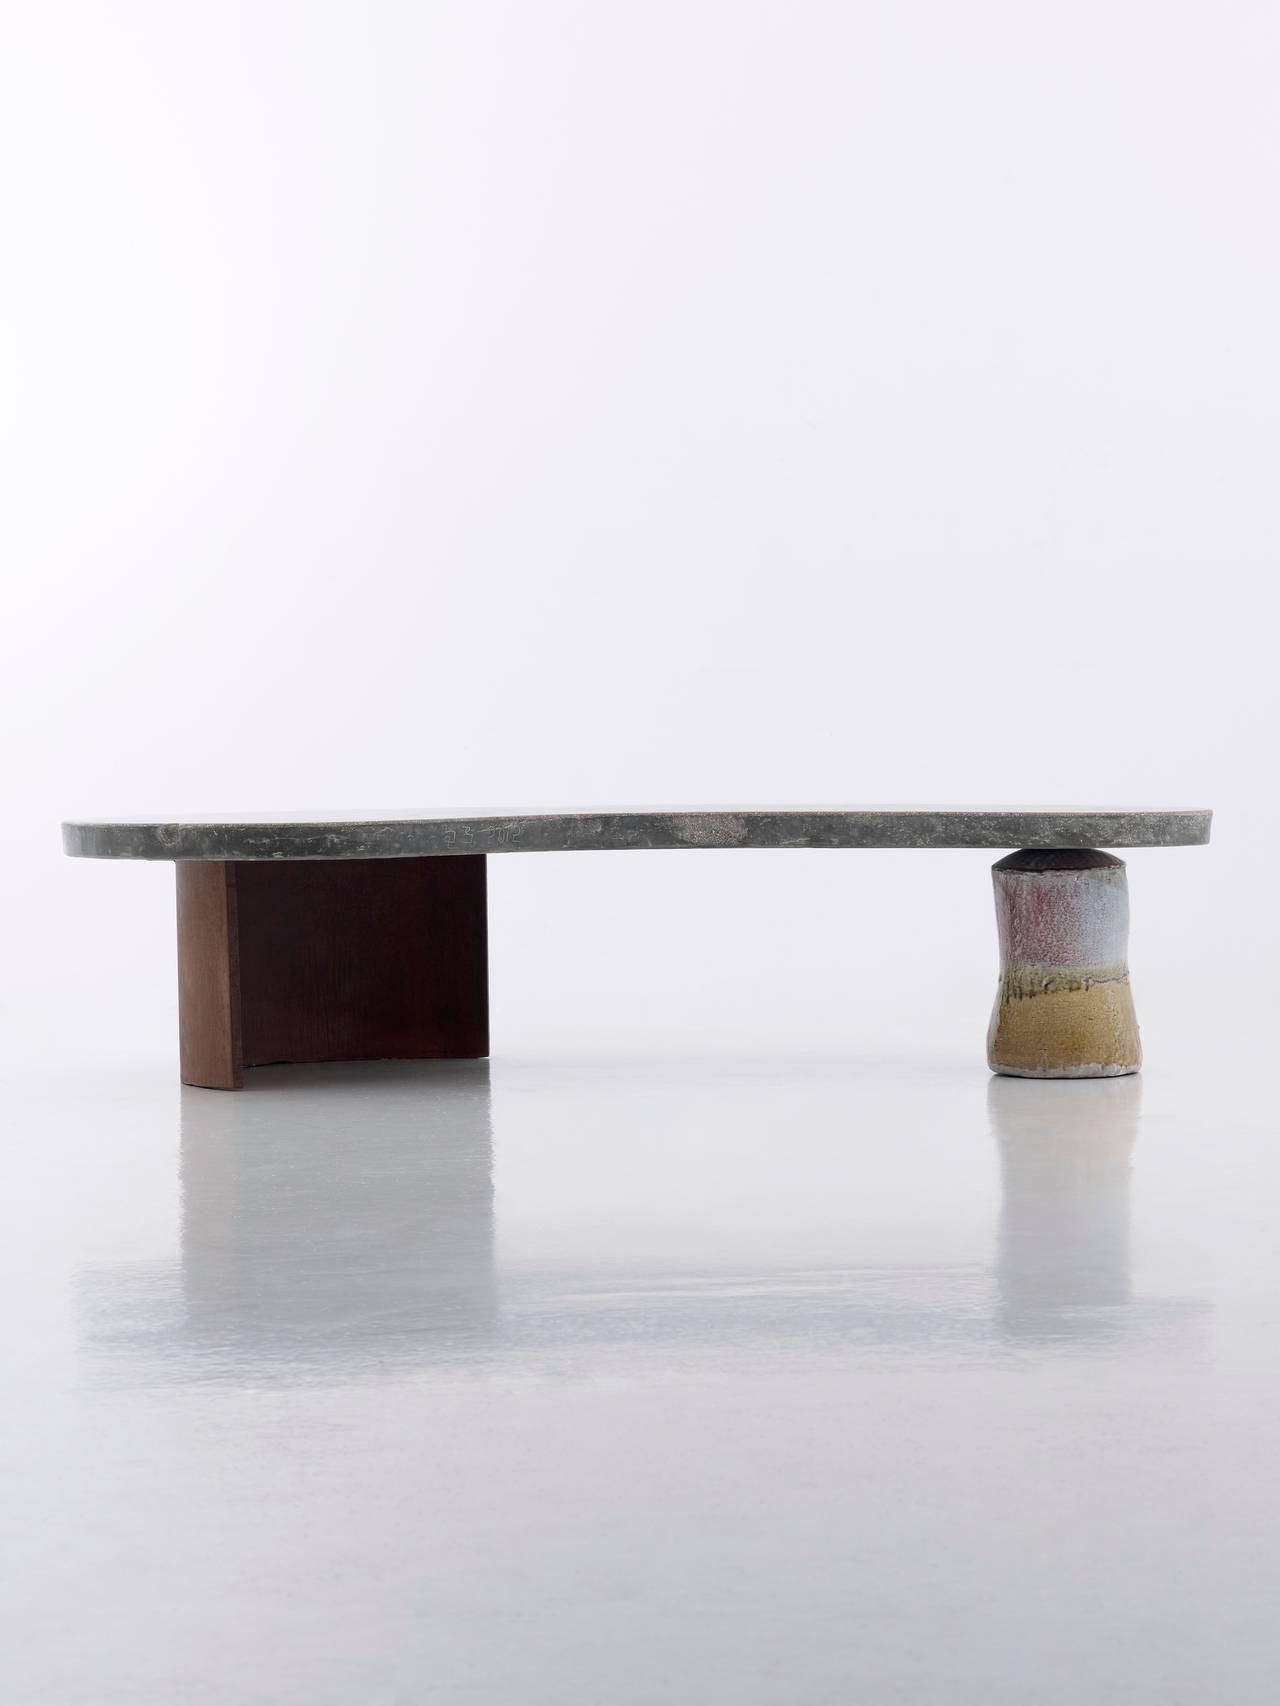 Lee Hun Chung.
Organic lined concrete bench,
2012.
Concrete, glazed ceramic, natural rusted steel.
Measure: 184 W x 98 D x 46 H cm,
72 x 38.5 x 18.5 H inches.